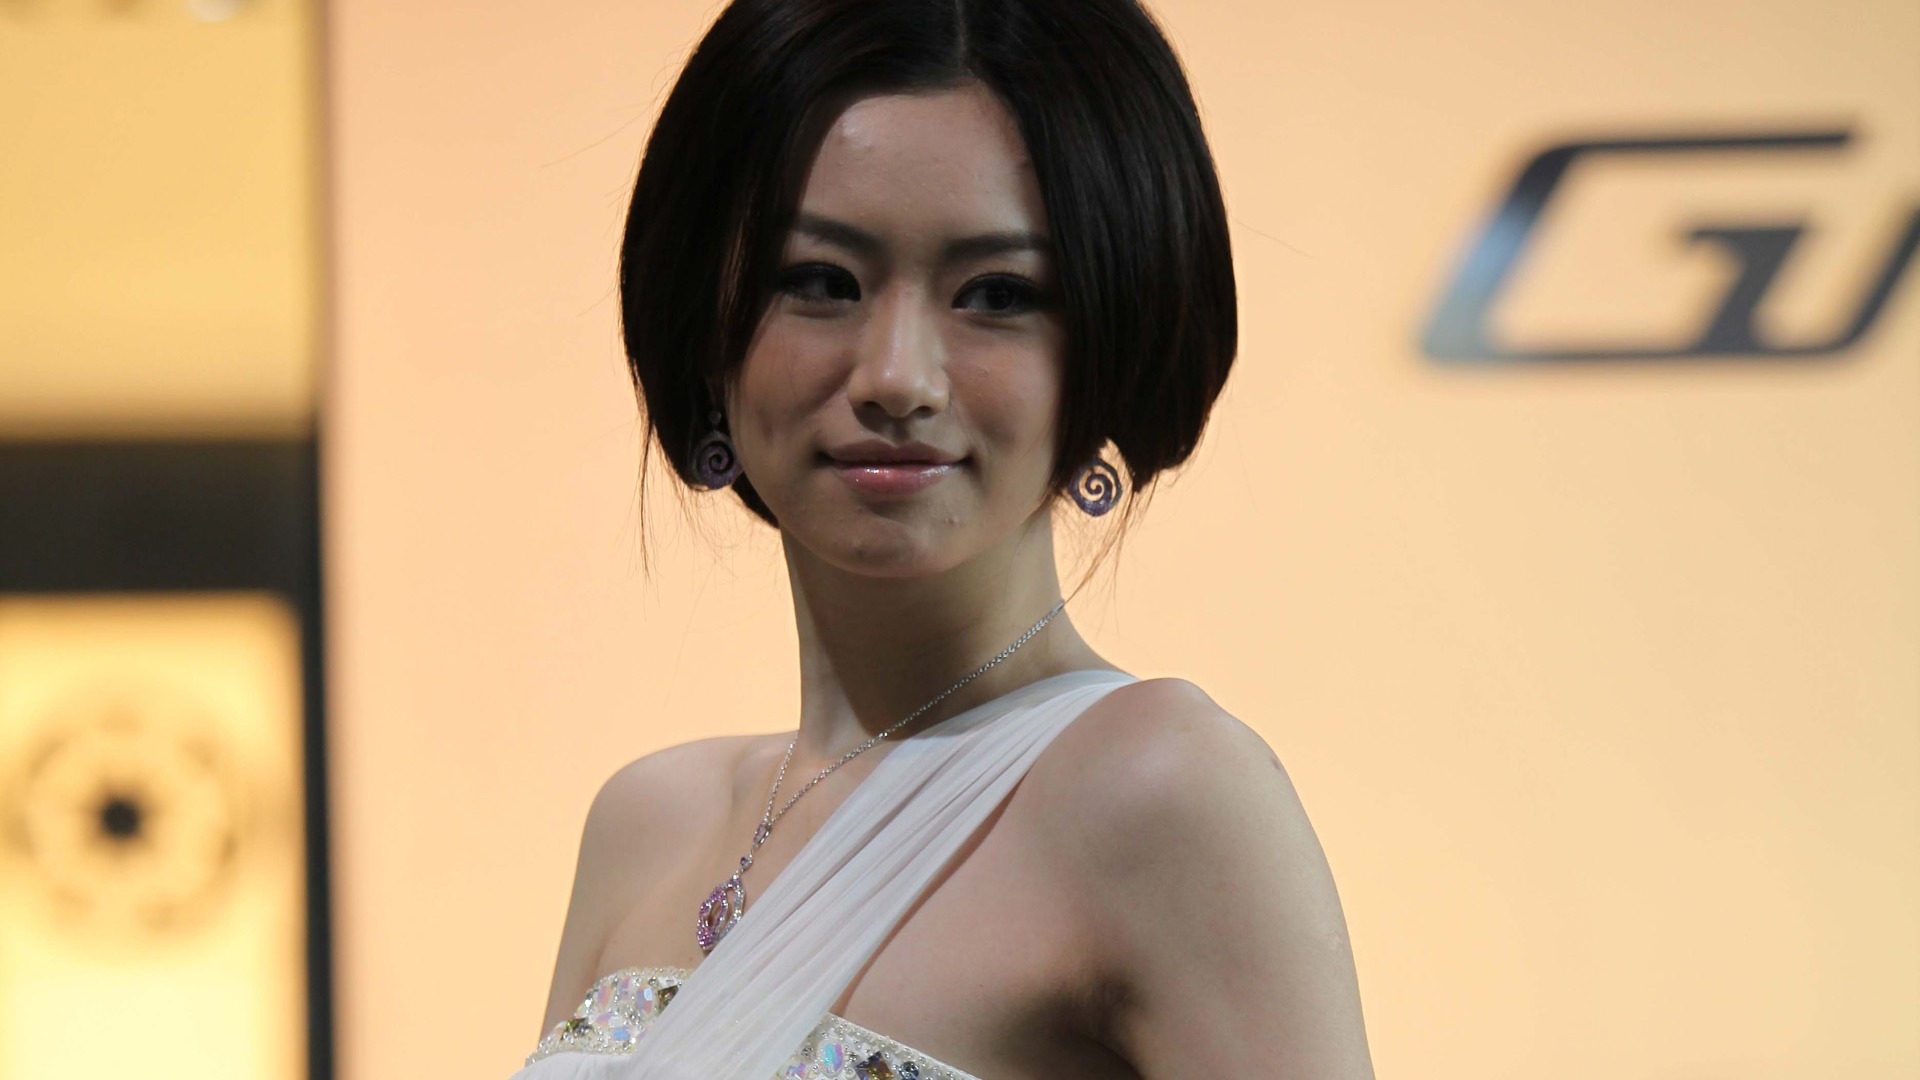 2010 Beijing International Auto Show beauty (1) (the wind chasing the clouds works) #23 - 1920x1080